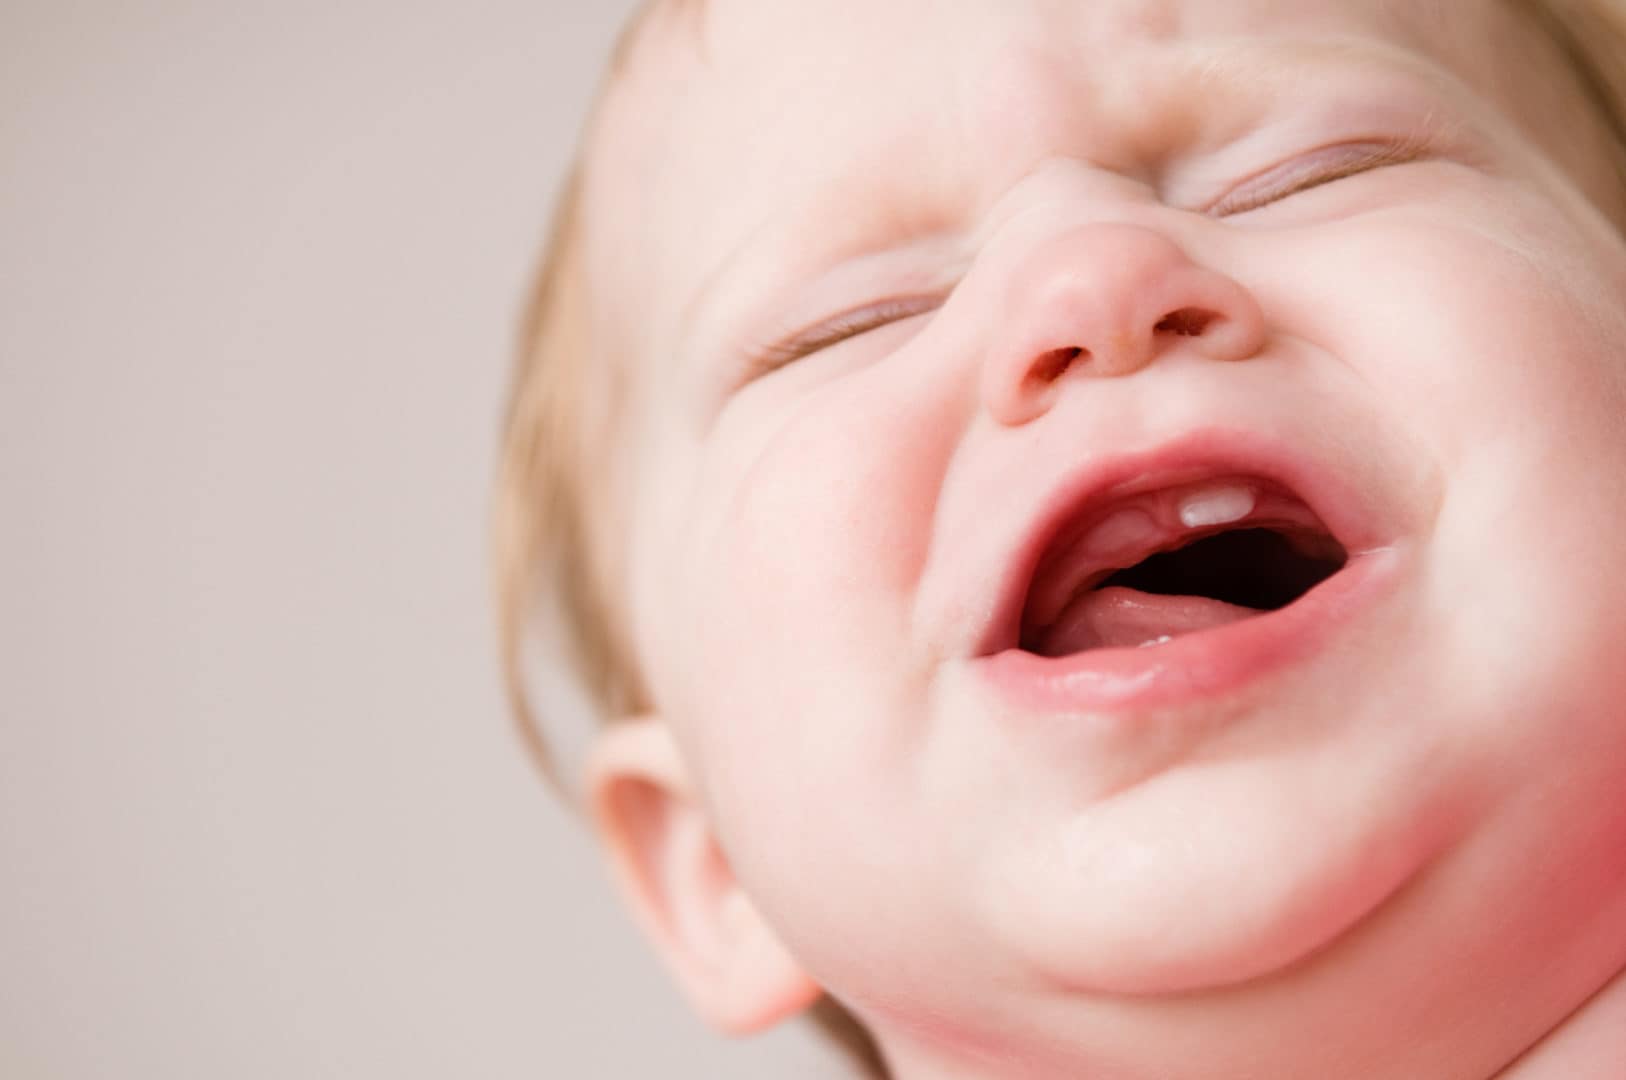 Can teething cause fever in babies?